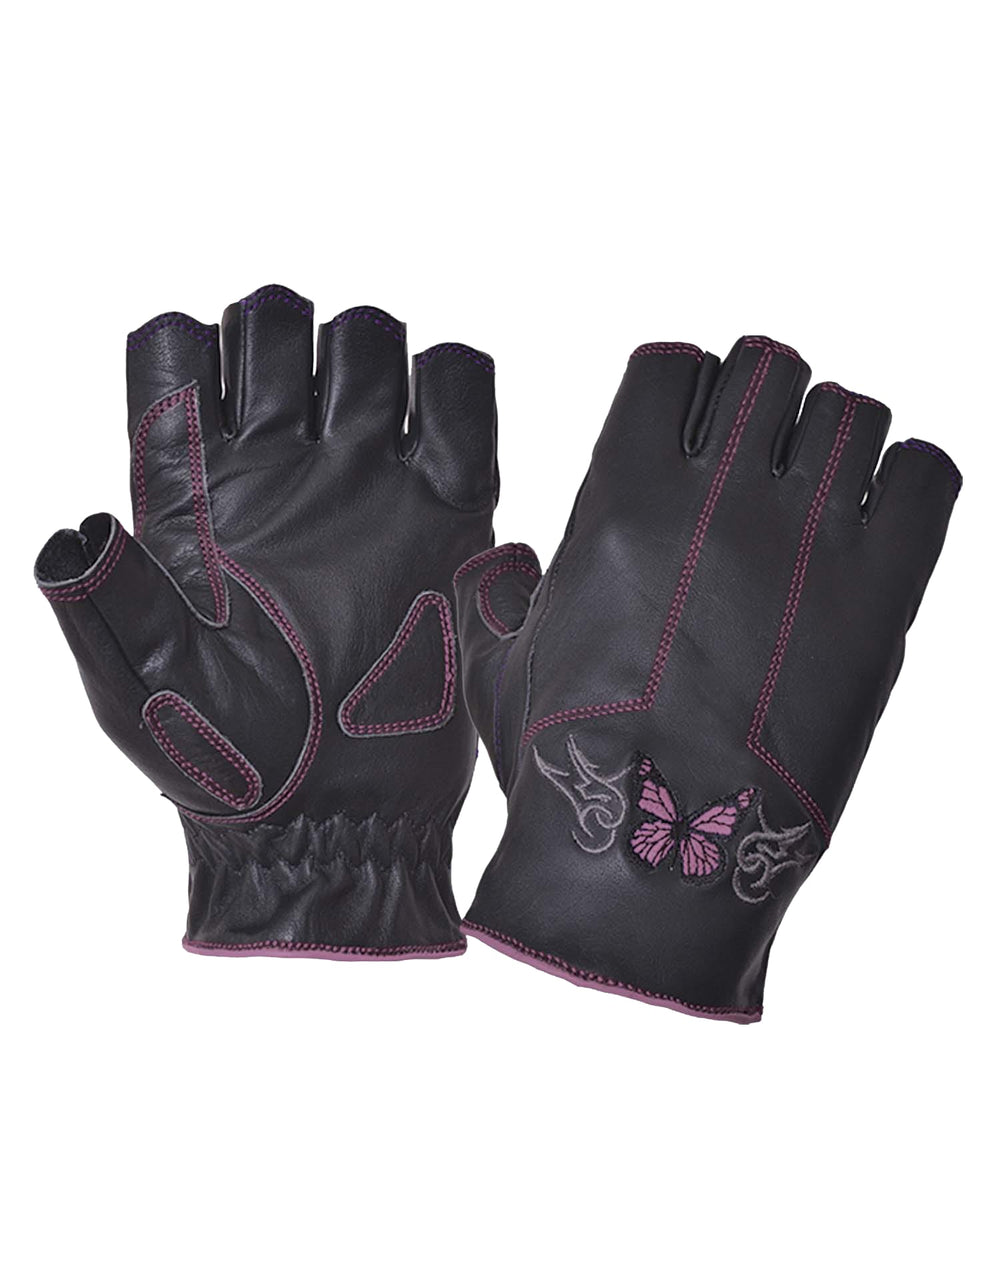 Ladies Fingerless Motorcycle Gloves with Butterfly Embroidery